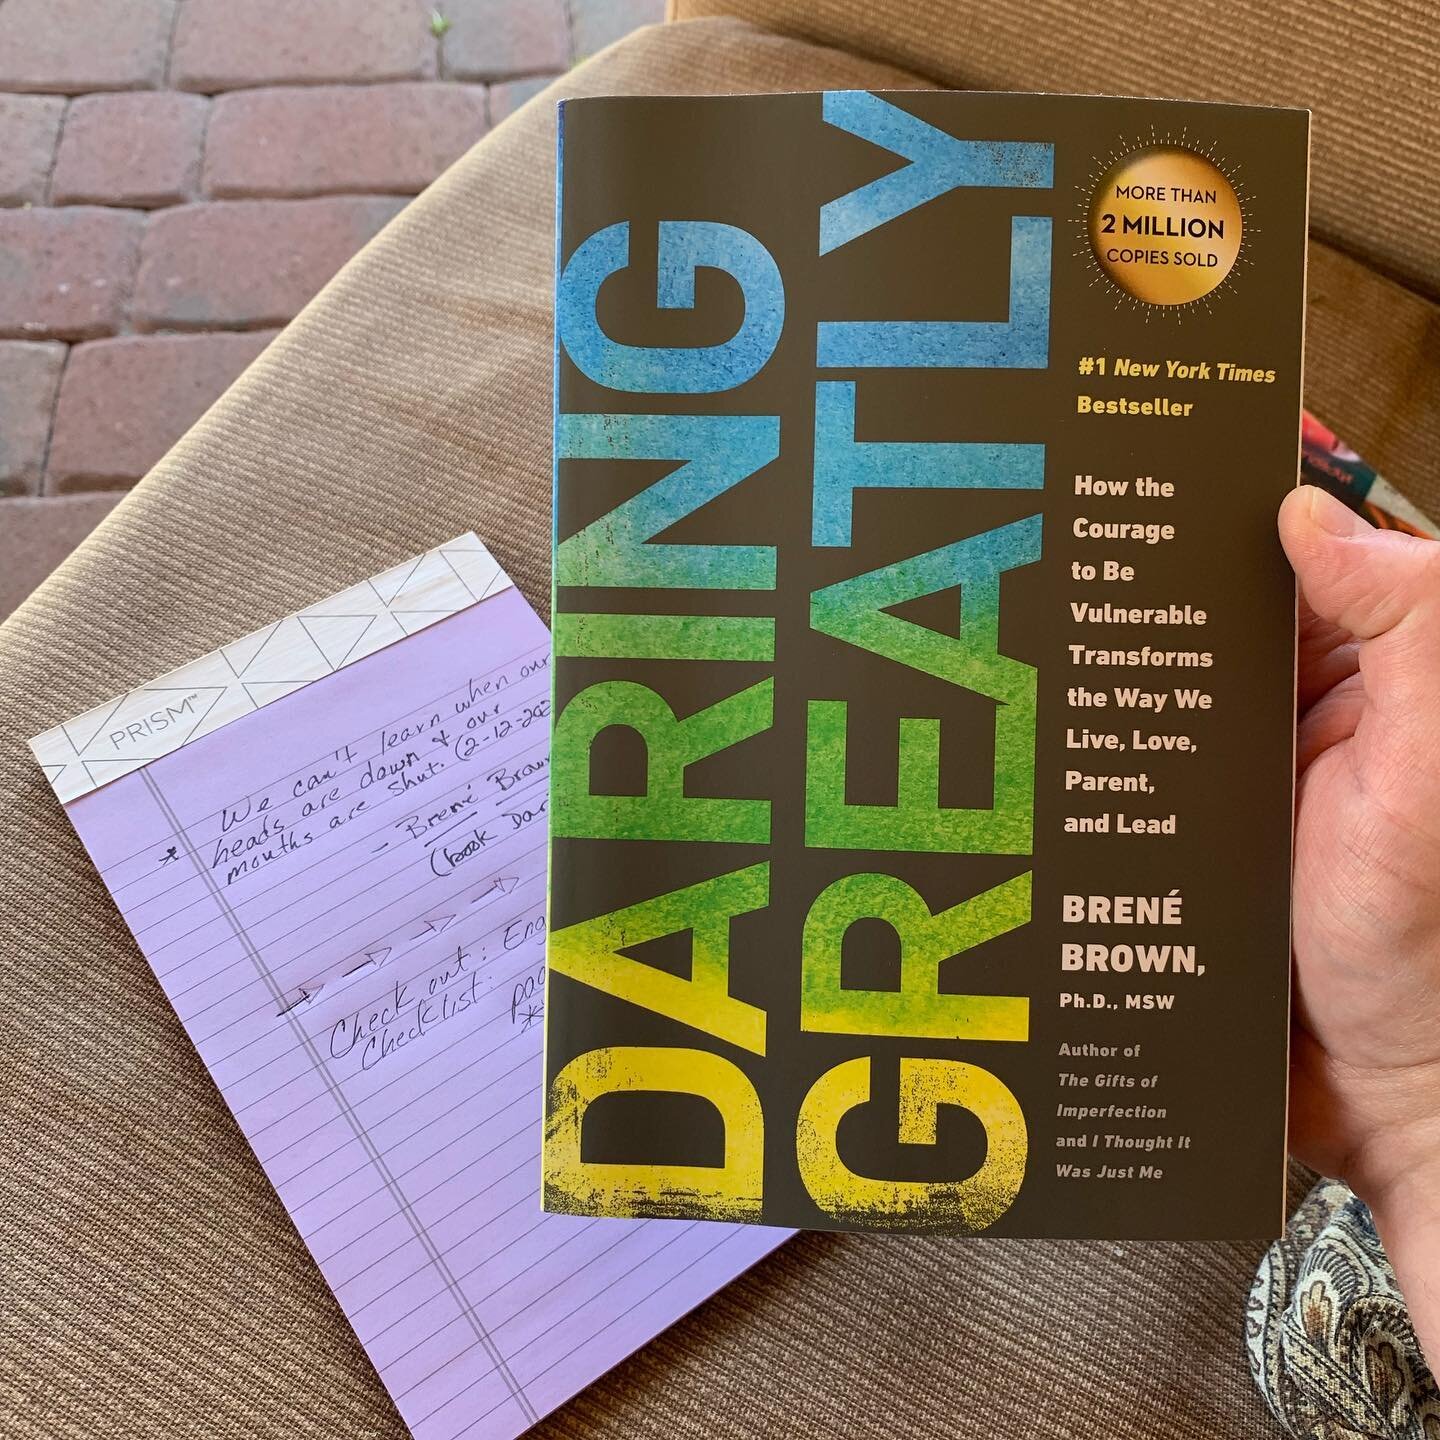 I recently finished the book Daring Greatly by Bren&eacute; Brown. It was a gift from my good friend @cesardavilairizarry . And let me tell you, what a gift! This book has taken me to places I never thought I could reach in life. 
Thank you, C&eacute